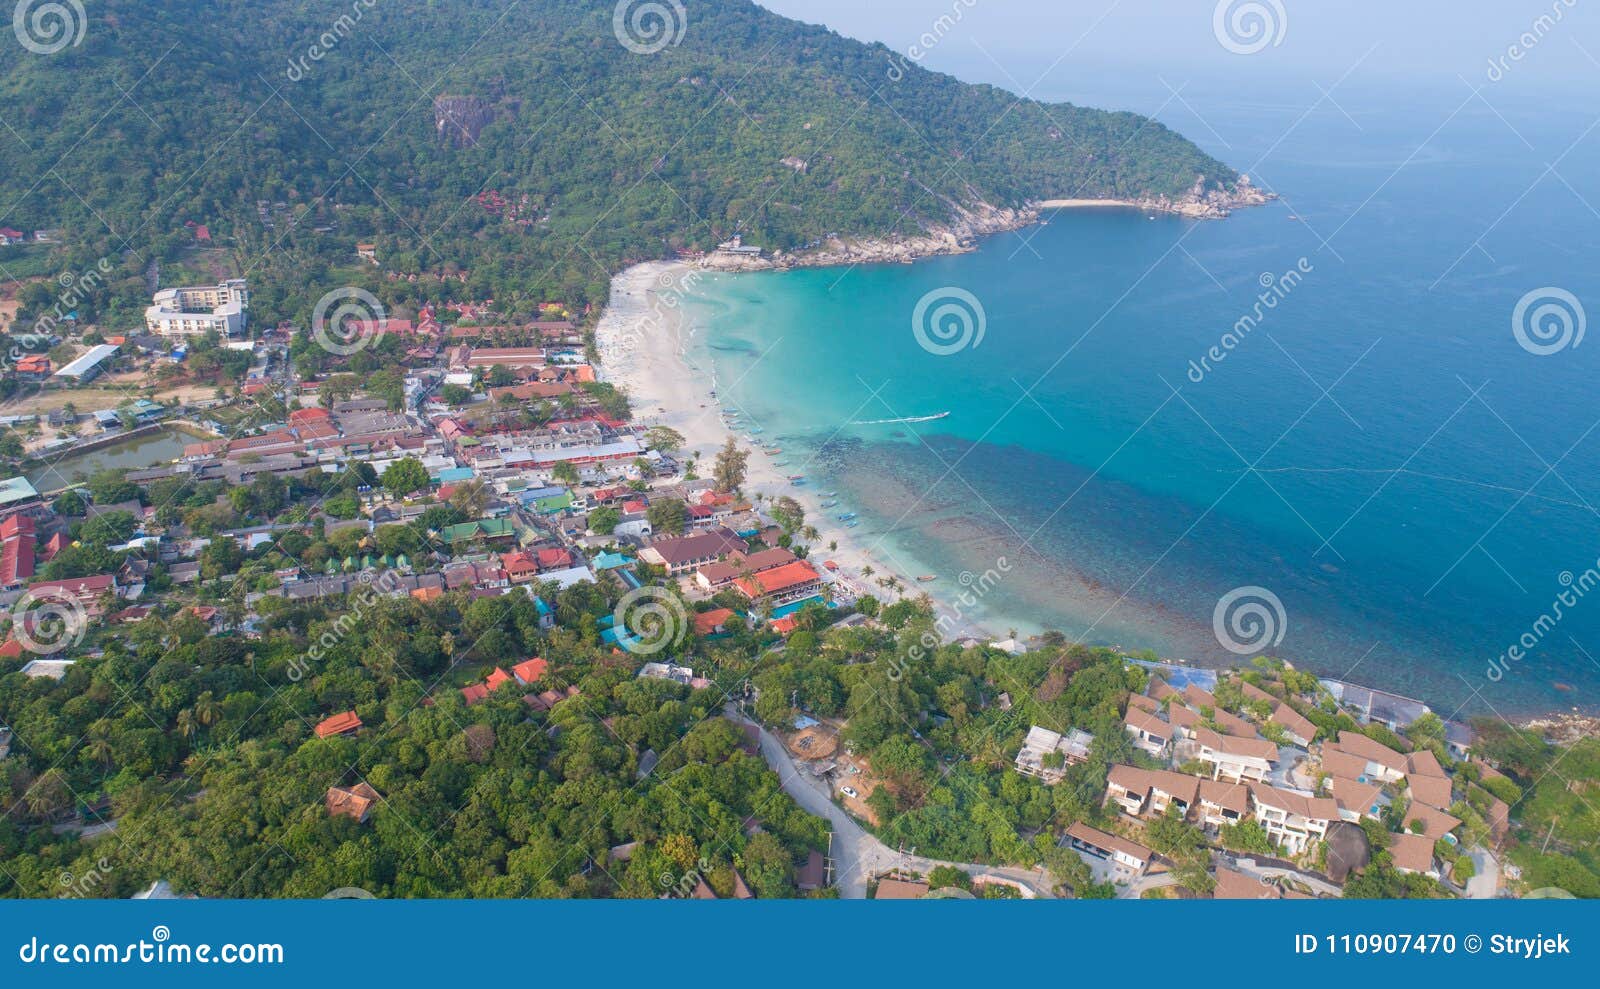 aerial view from the drone on the sand beach of haad rin, koh phangan island